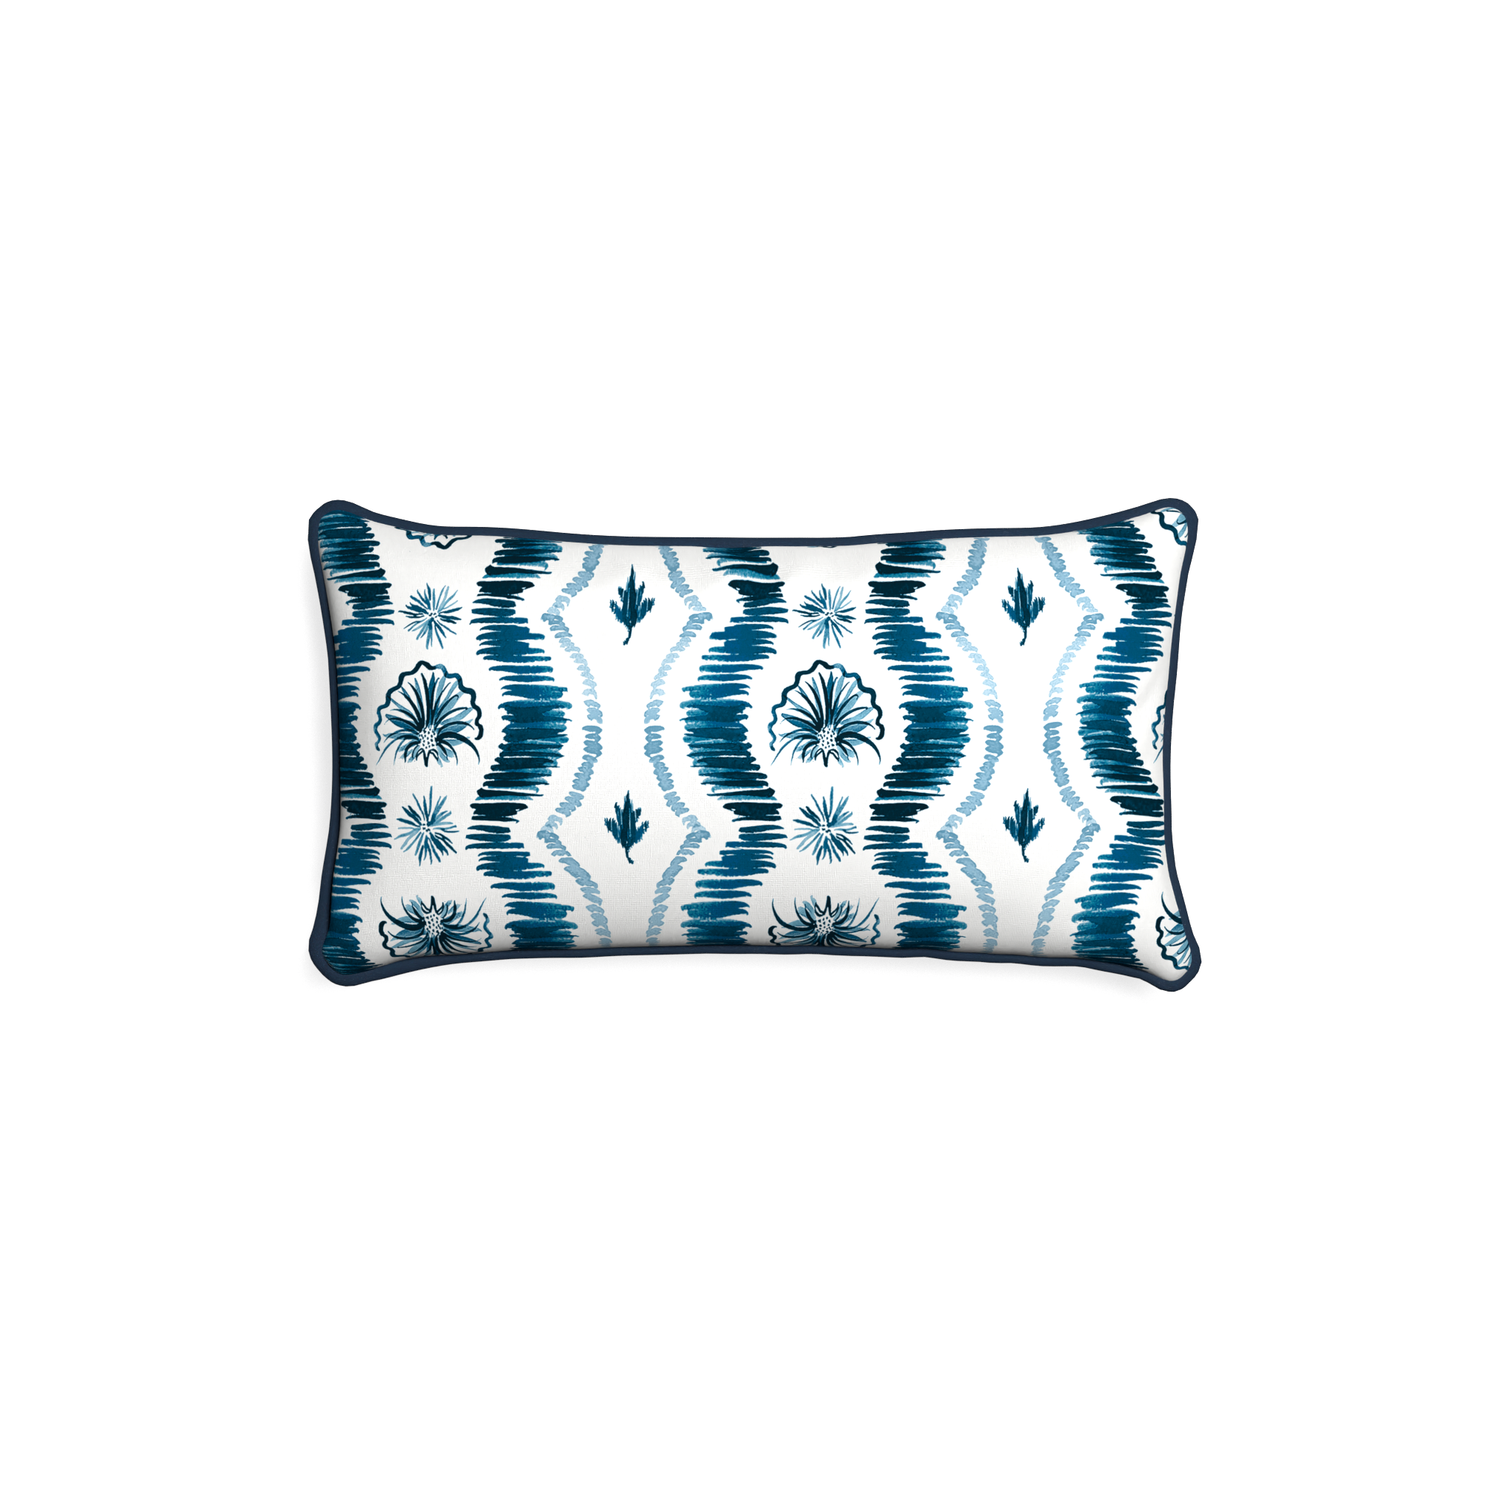 Petite-lumbar alice custom blue ikatpillow with c piping on white background